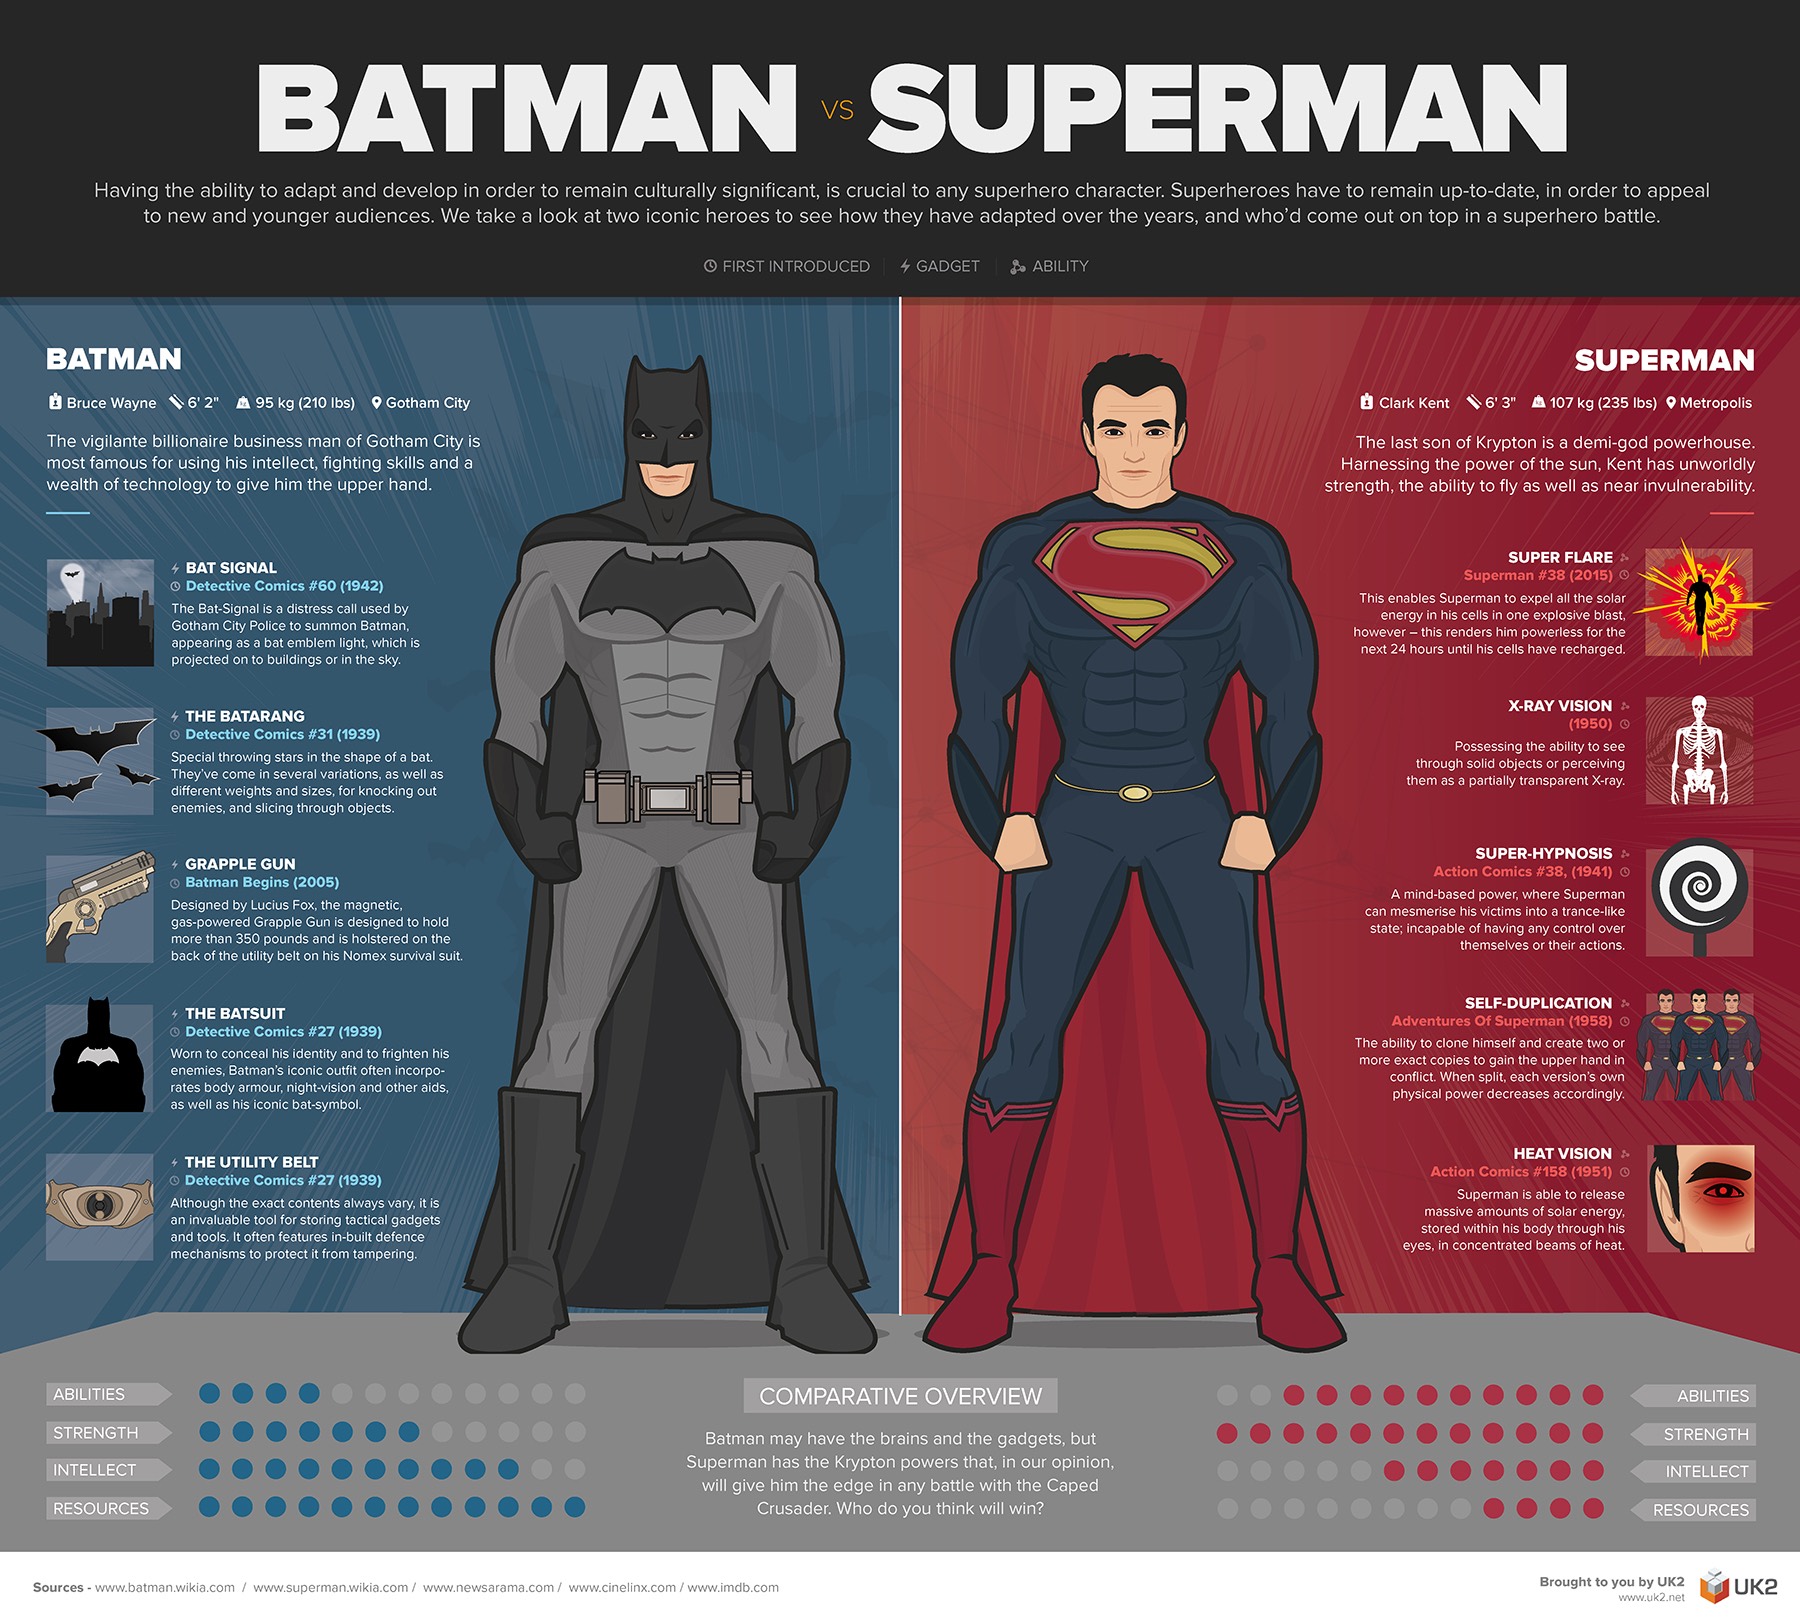 In a battle for God-like status, would Batman or Superman be victorious? |  